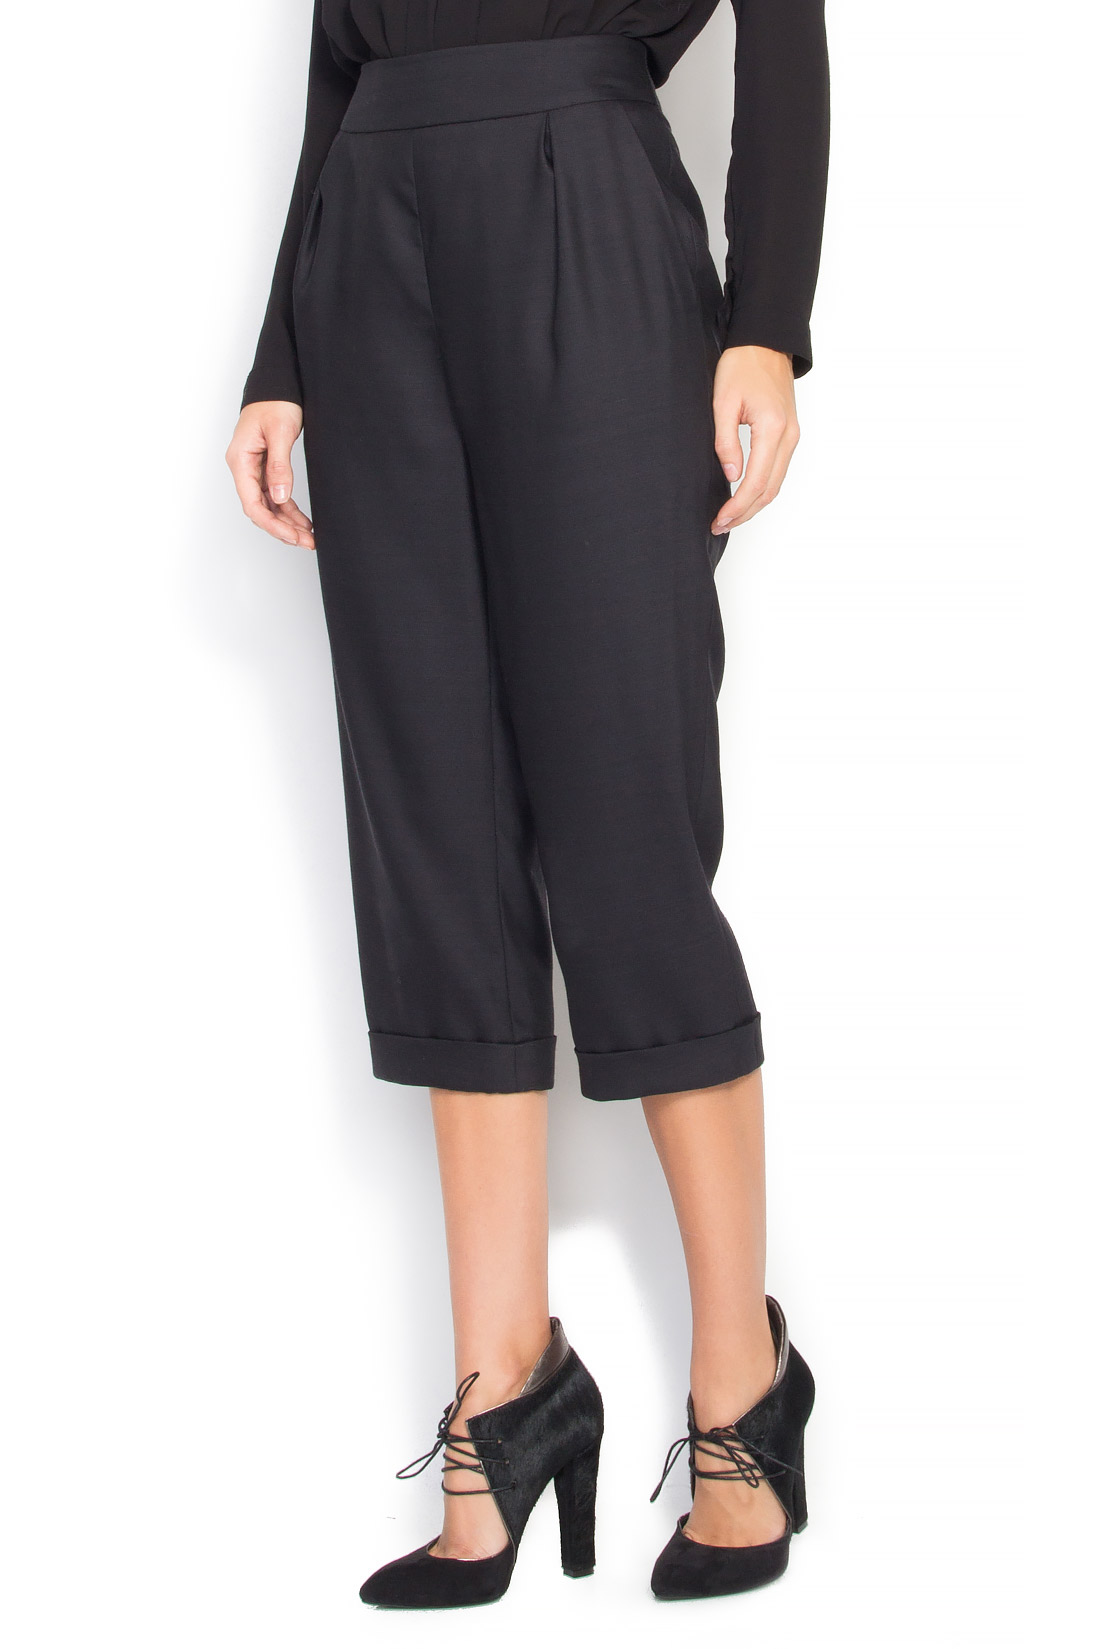 Wool-crepe tapered pants Claudia Castrase image 1